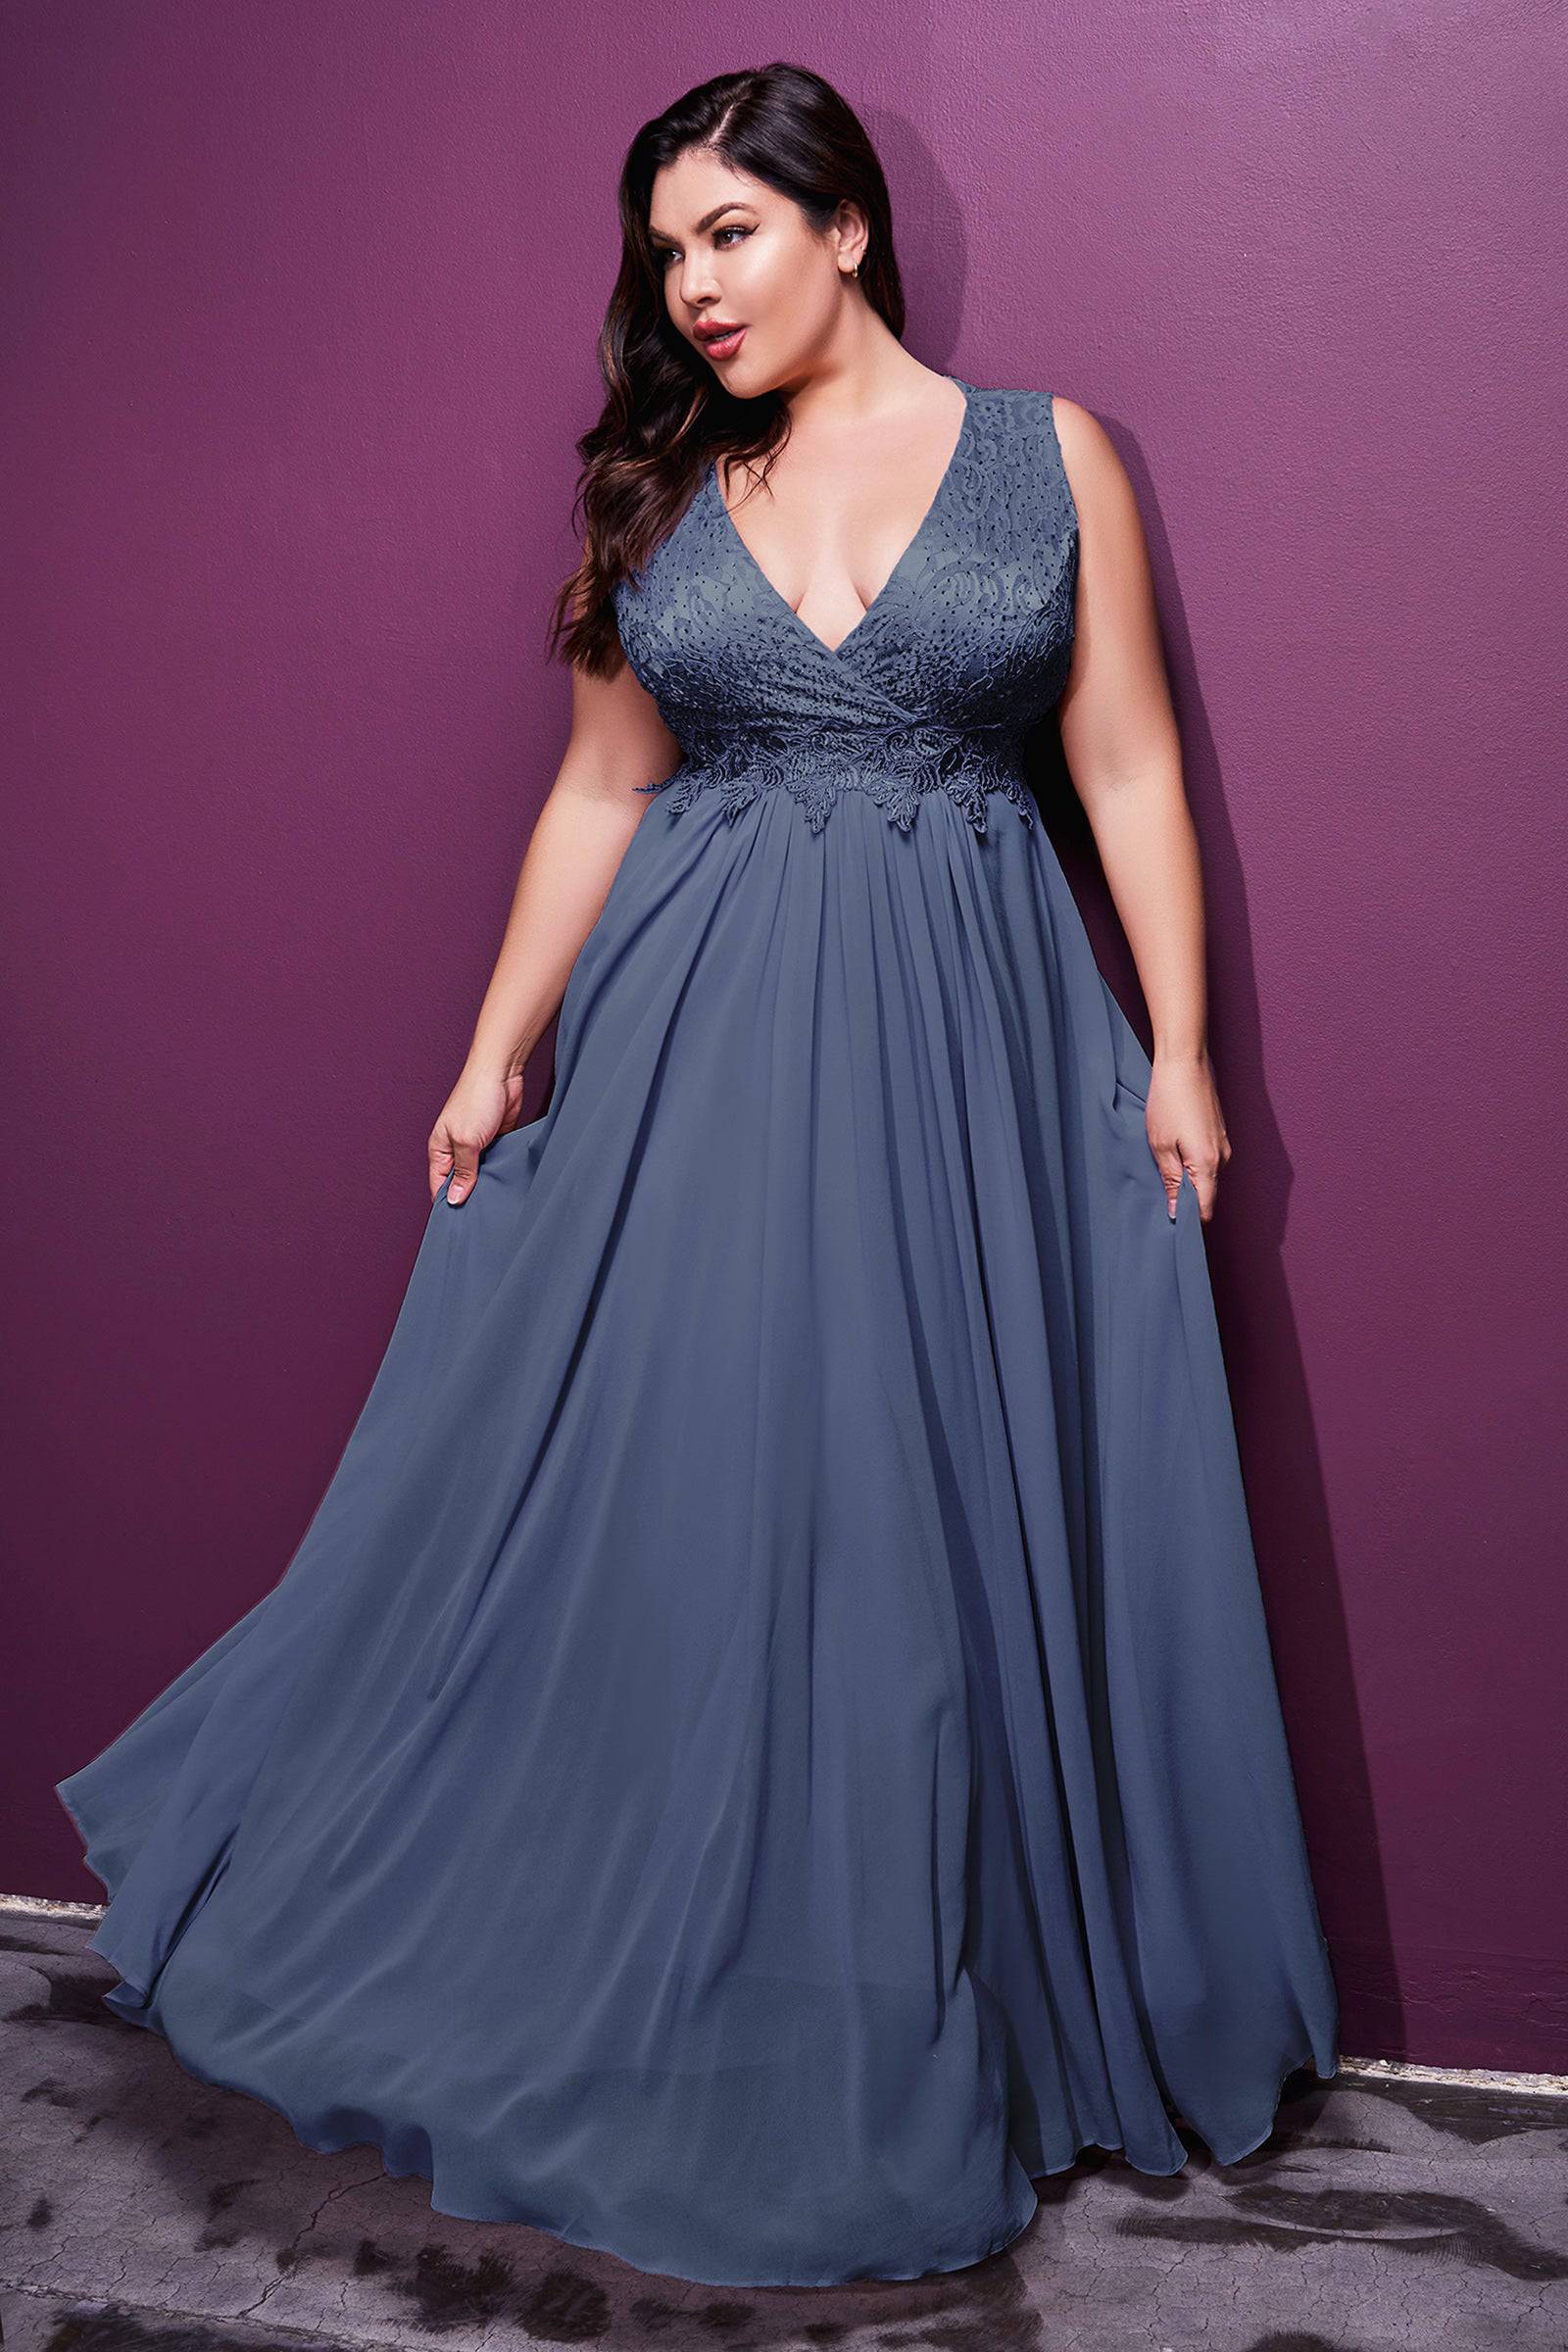 Velvet Wedding Prom Dress With Train, Plus Size Velvet Dress With Long  Sleeves, Reception Dress, Plus Size Mermaid Prom Dress, Formal Gown 